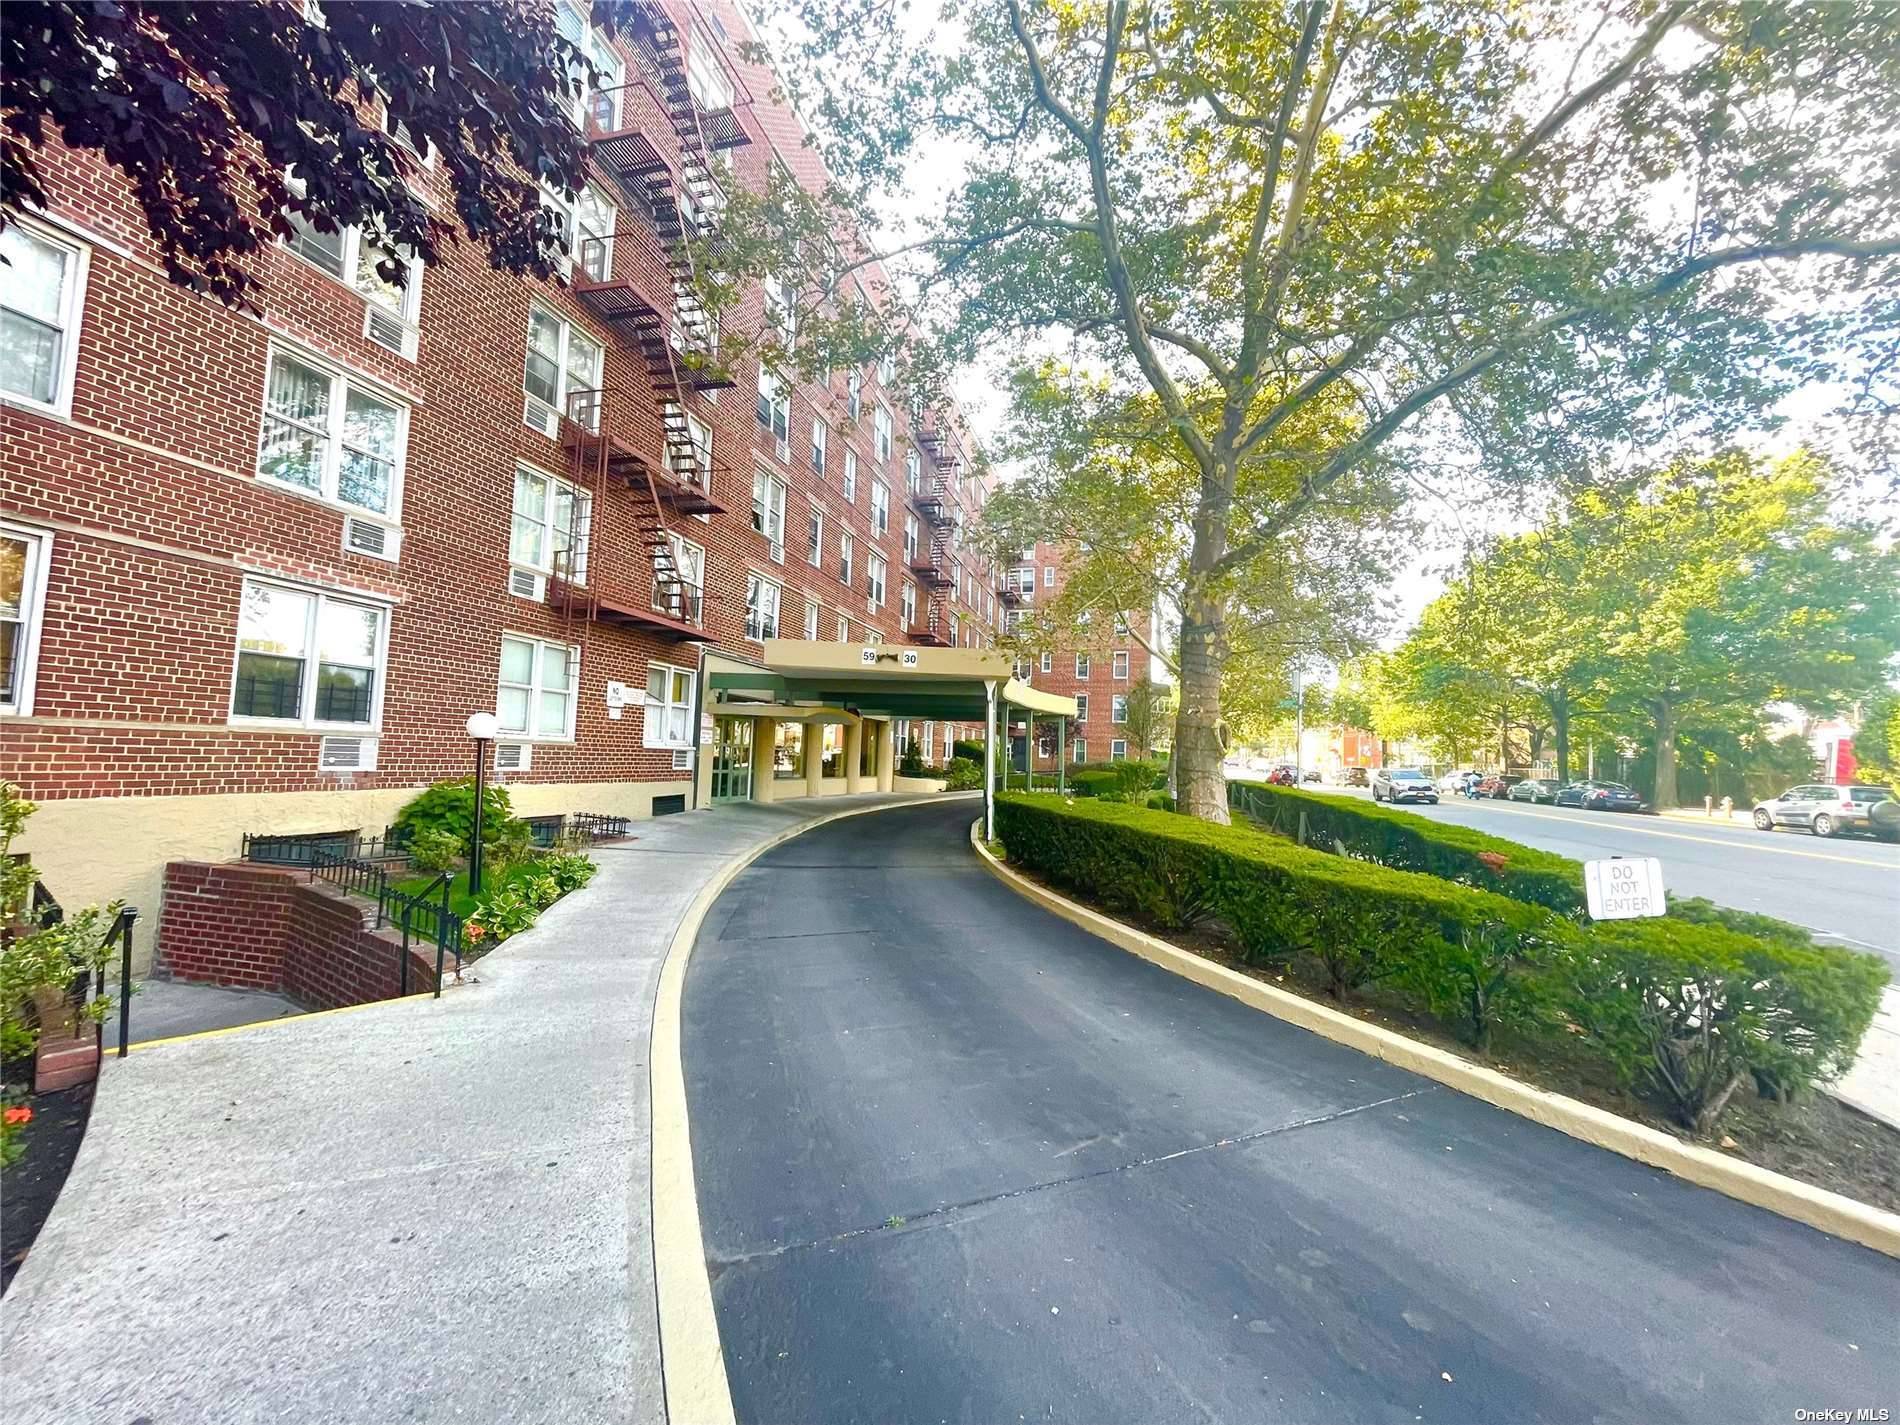 Charming one bedroom cooperative apartment is situated on convenient 108th street corona, right off Long island Expwy and Grand Central Pkwy, steps away from Q58 and Q88 MTA bus stops, ...